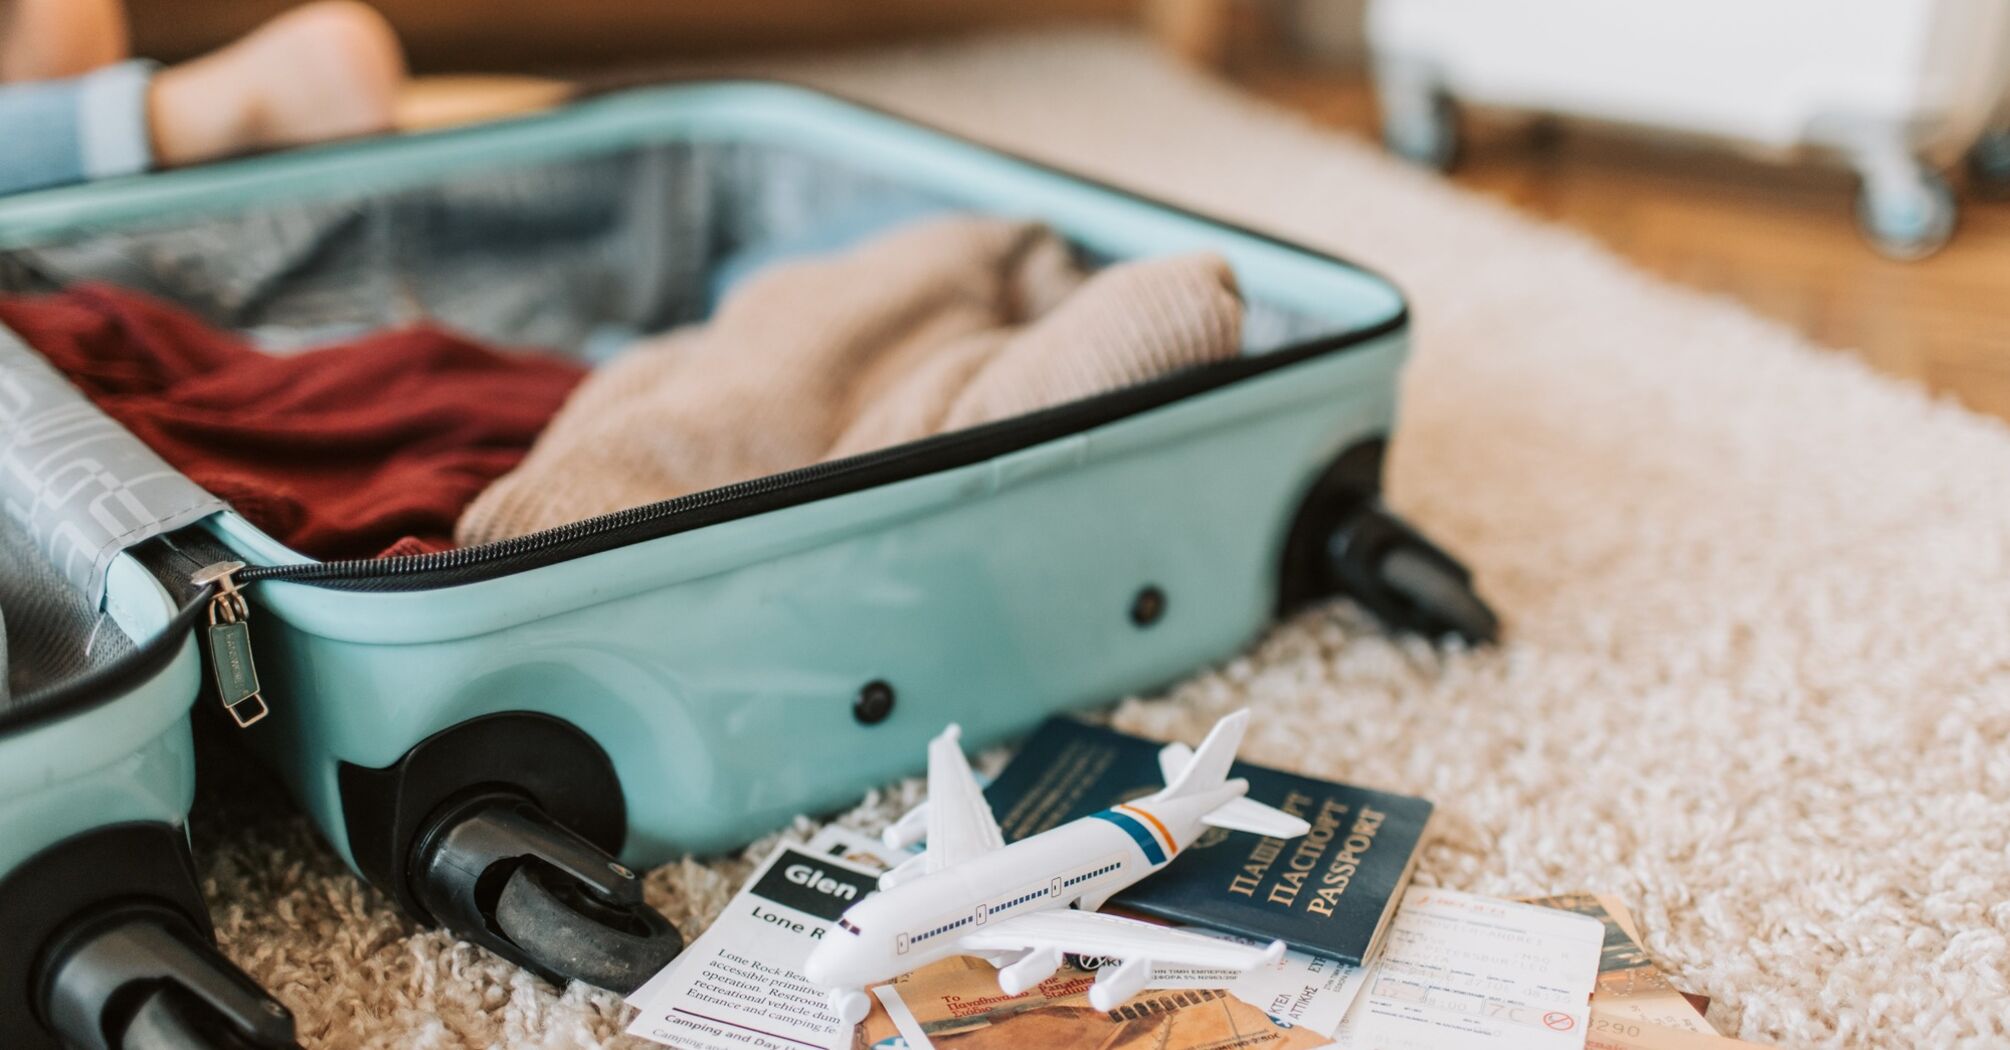 How to pack carry-on luggage correctly when everything is bulky